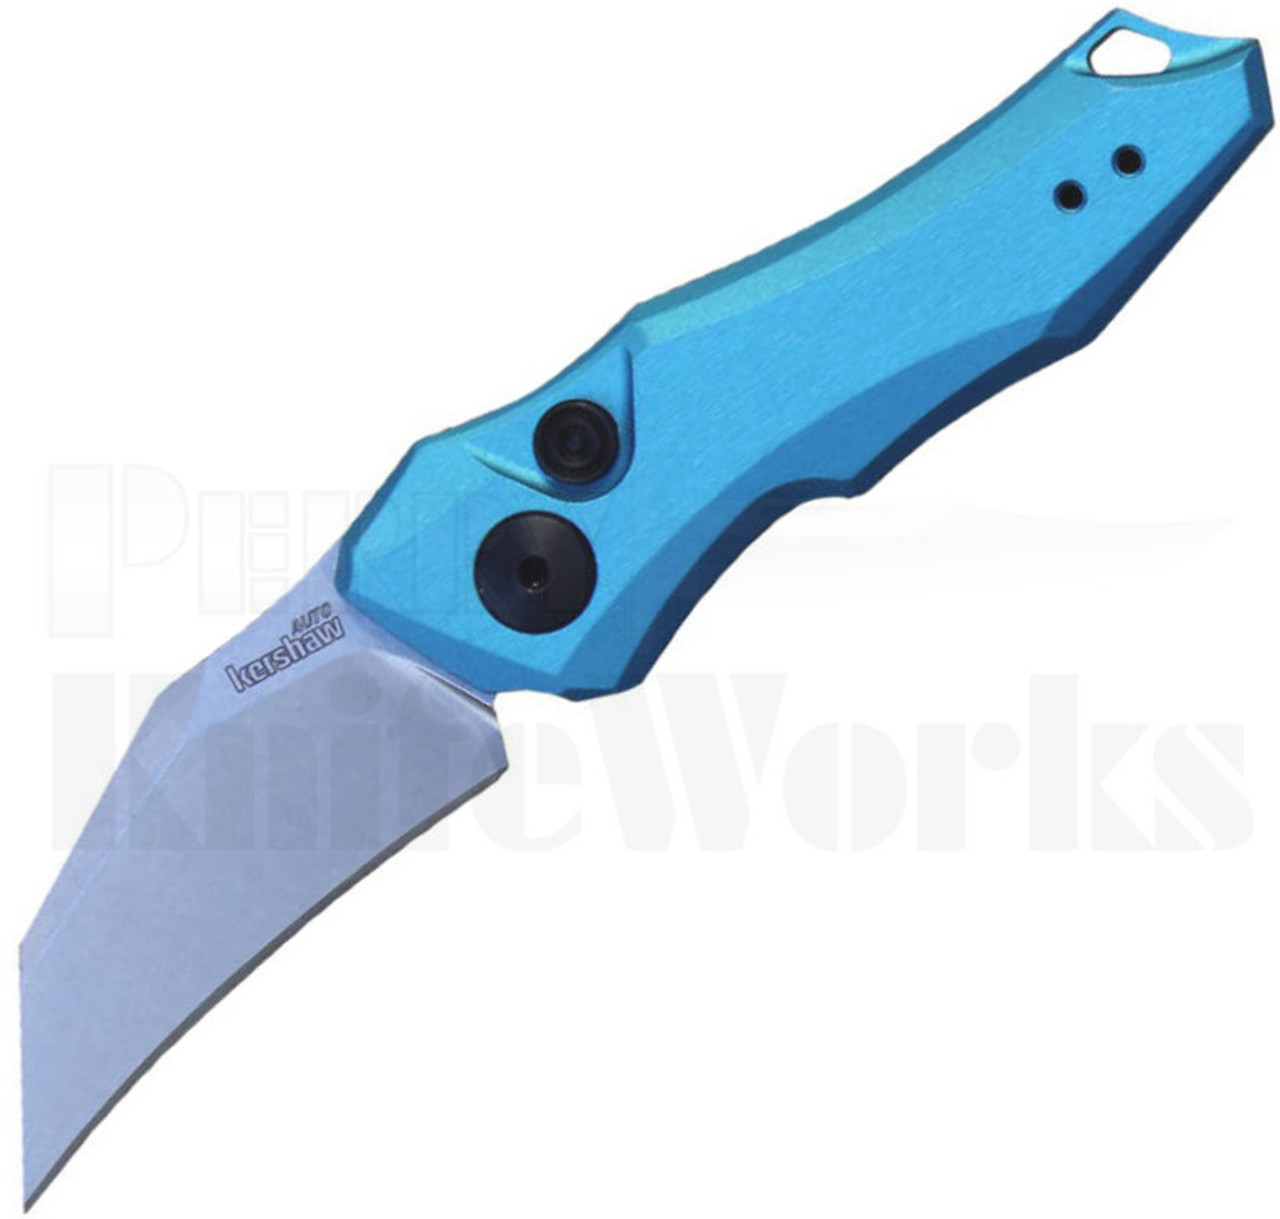 Kershaw Launch 10 Automatic Knife Teal l 7350